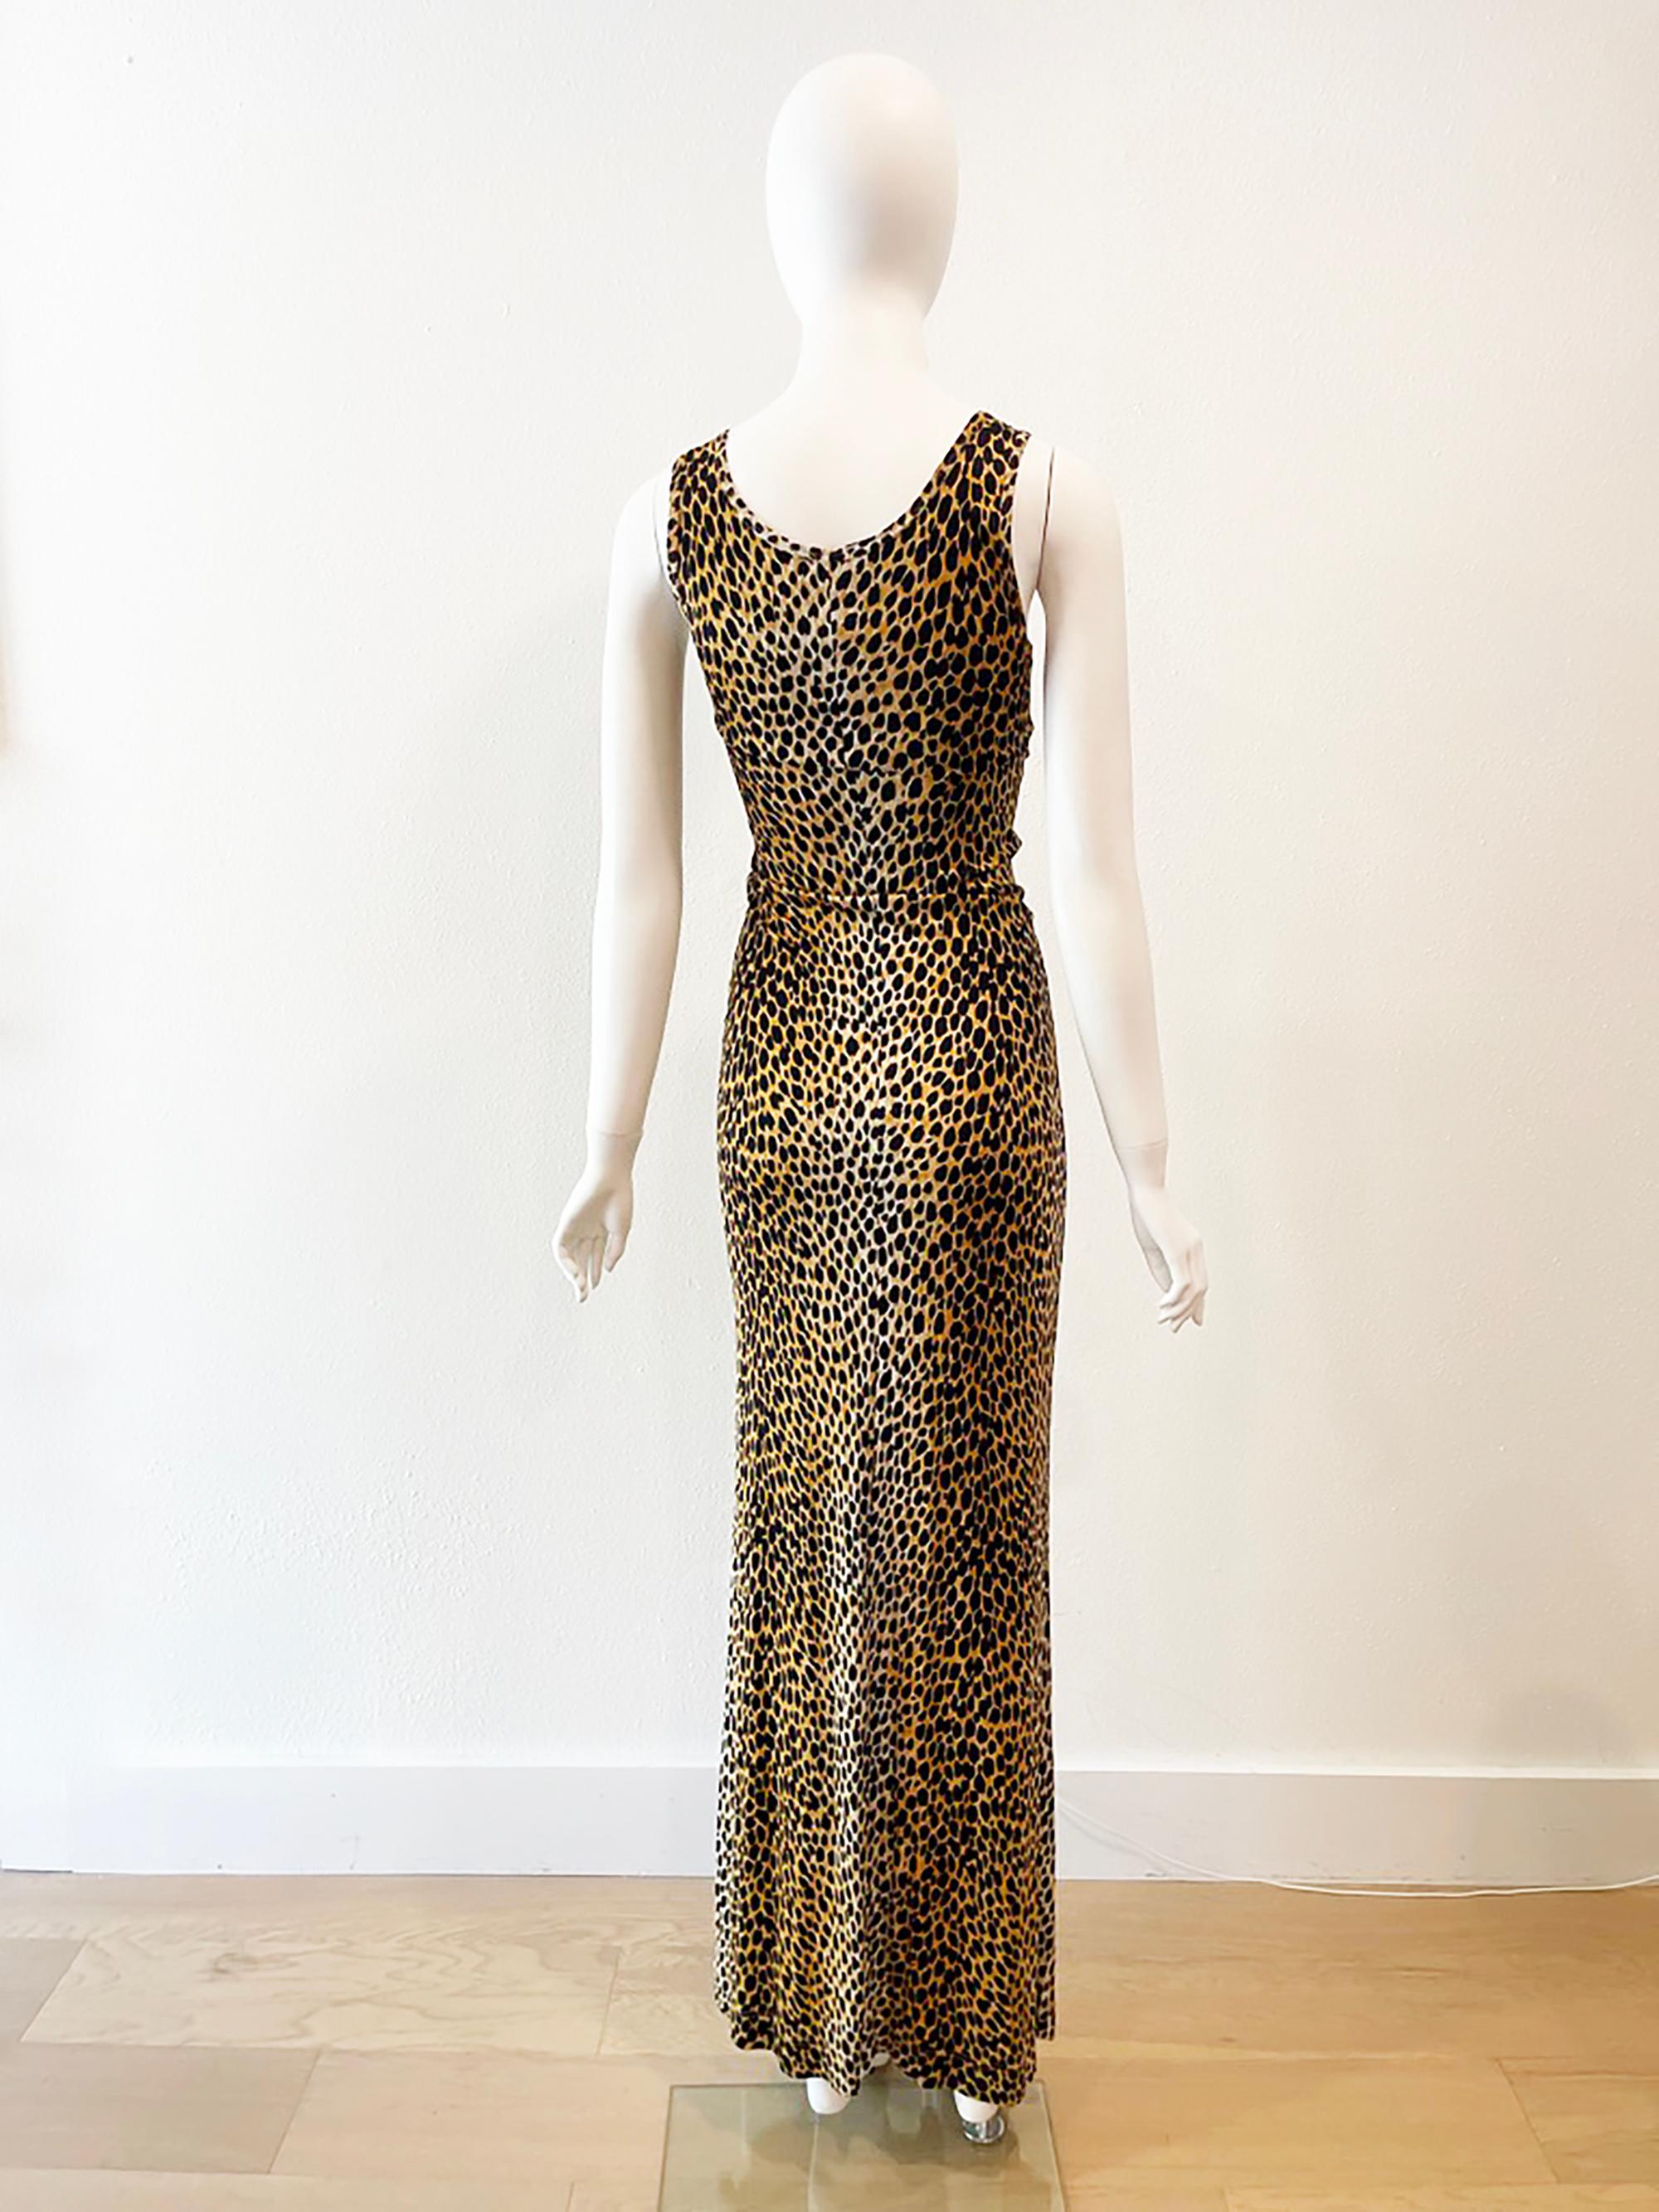 S/S 1996 Dolce & Gabbana Cheetah Long Stretch Gown 
Condition: missing main label, otherwise excellent
100% viscose
Made in Italy
Bust: 26